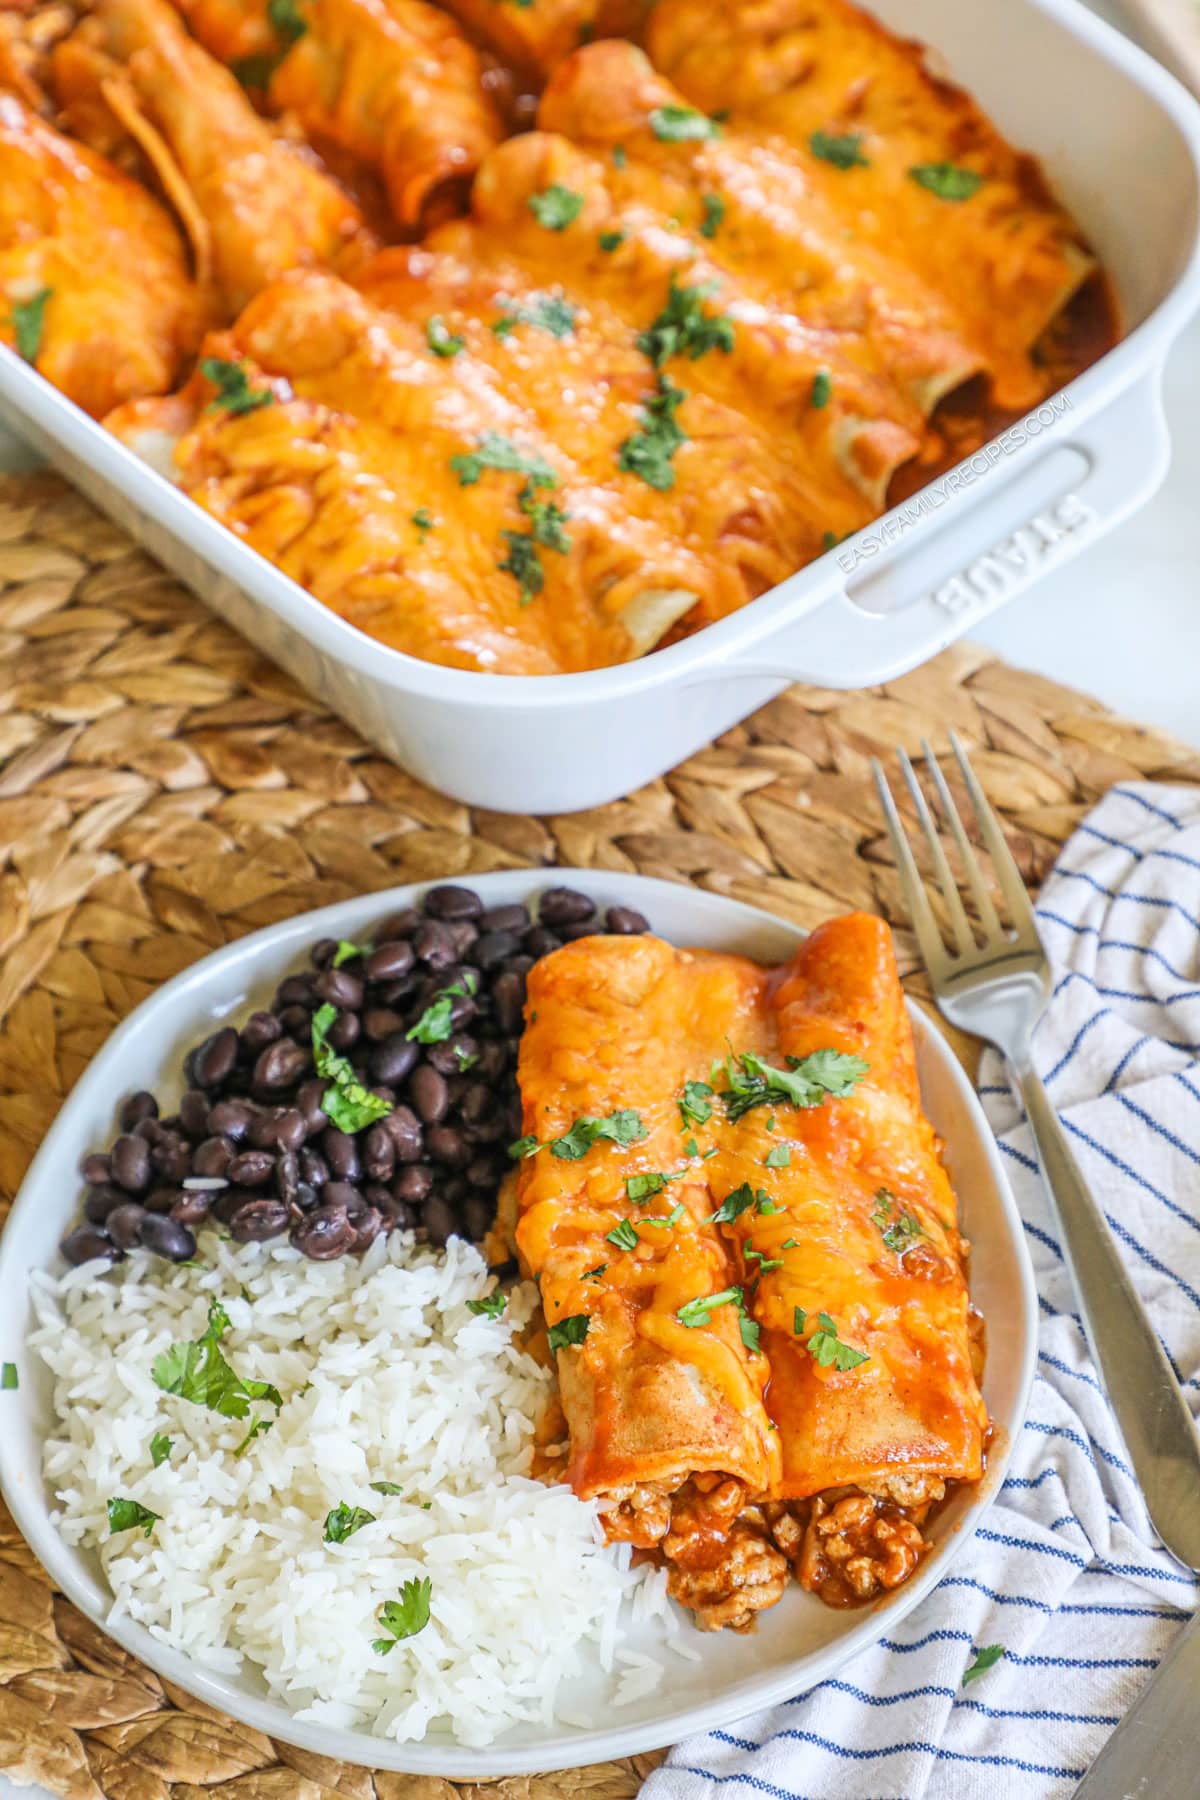 Turkey enchiladas on a plate with black beans and rice with the casserole dish of enchiladas nearby.